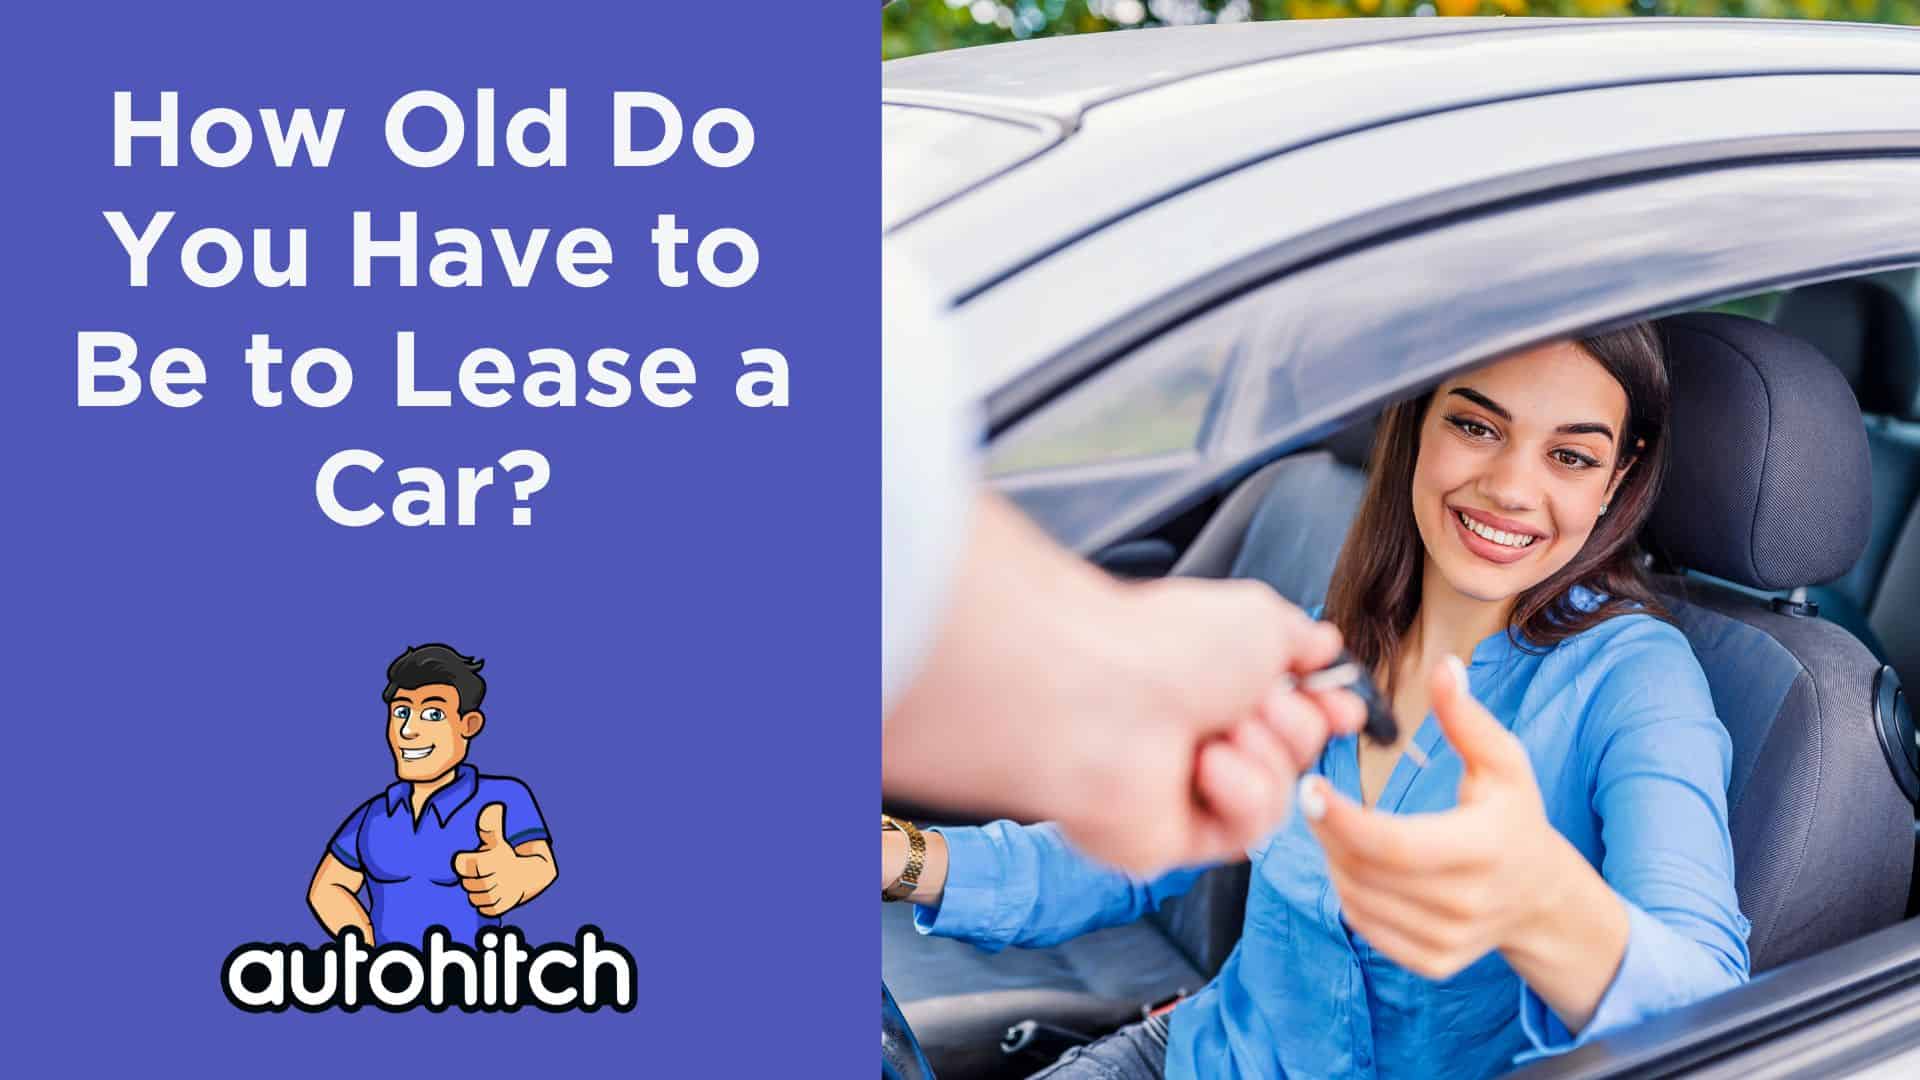 How Old Do You Have to Be to Lease a Car